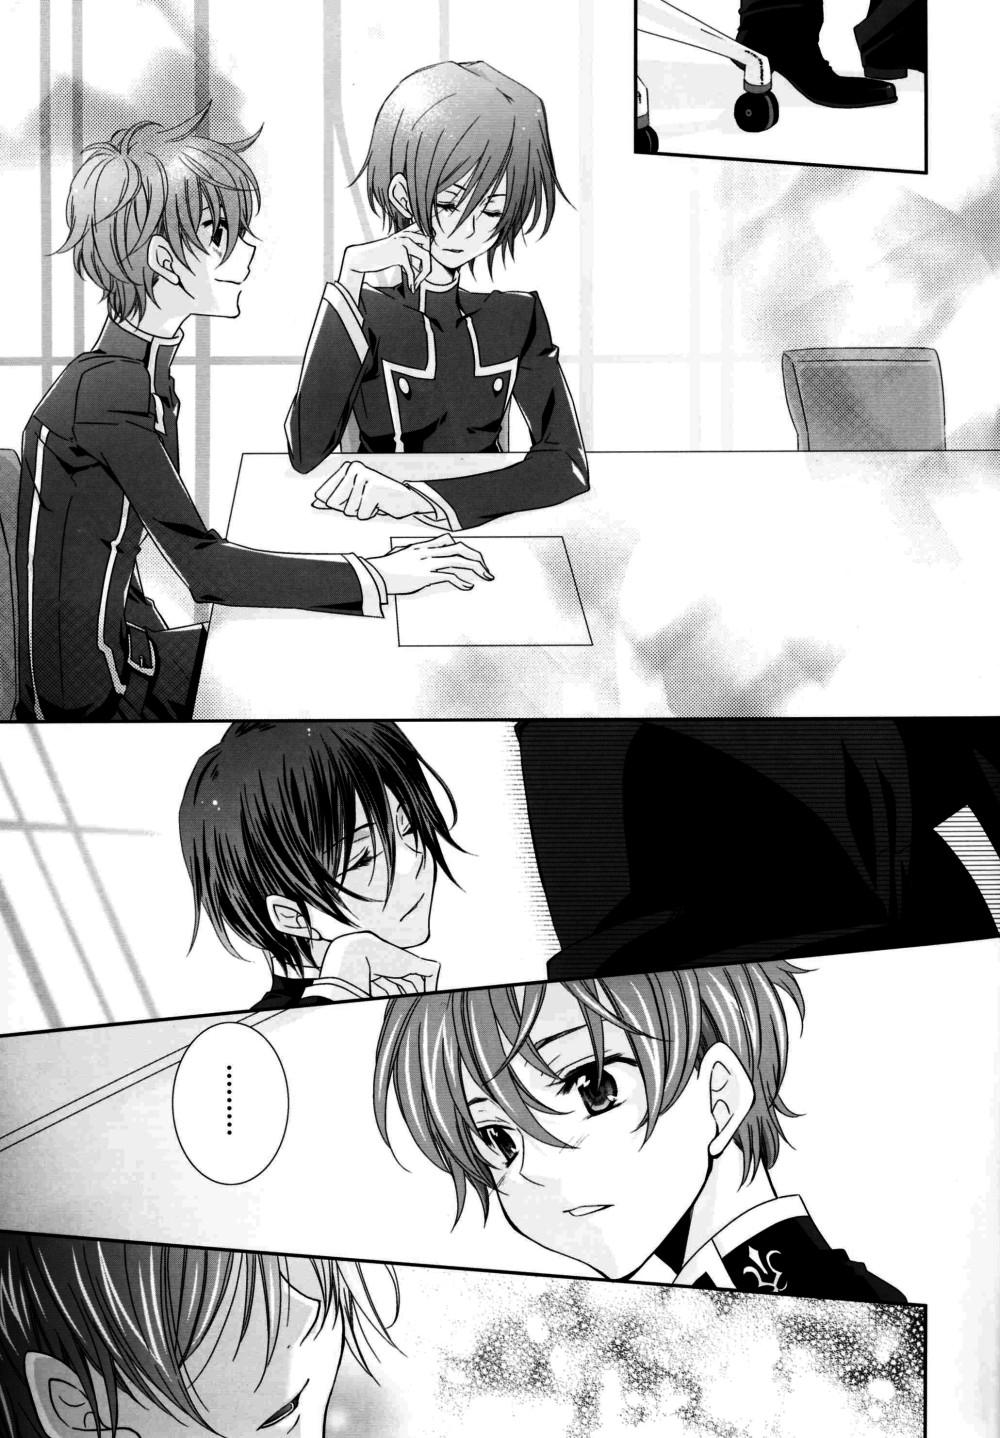 Masturbando after school with you - Code geass Gay Hairy - Page 6